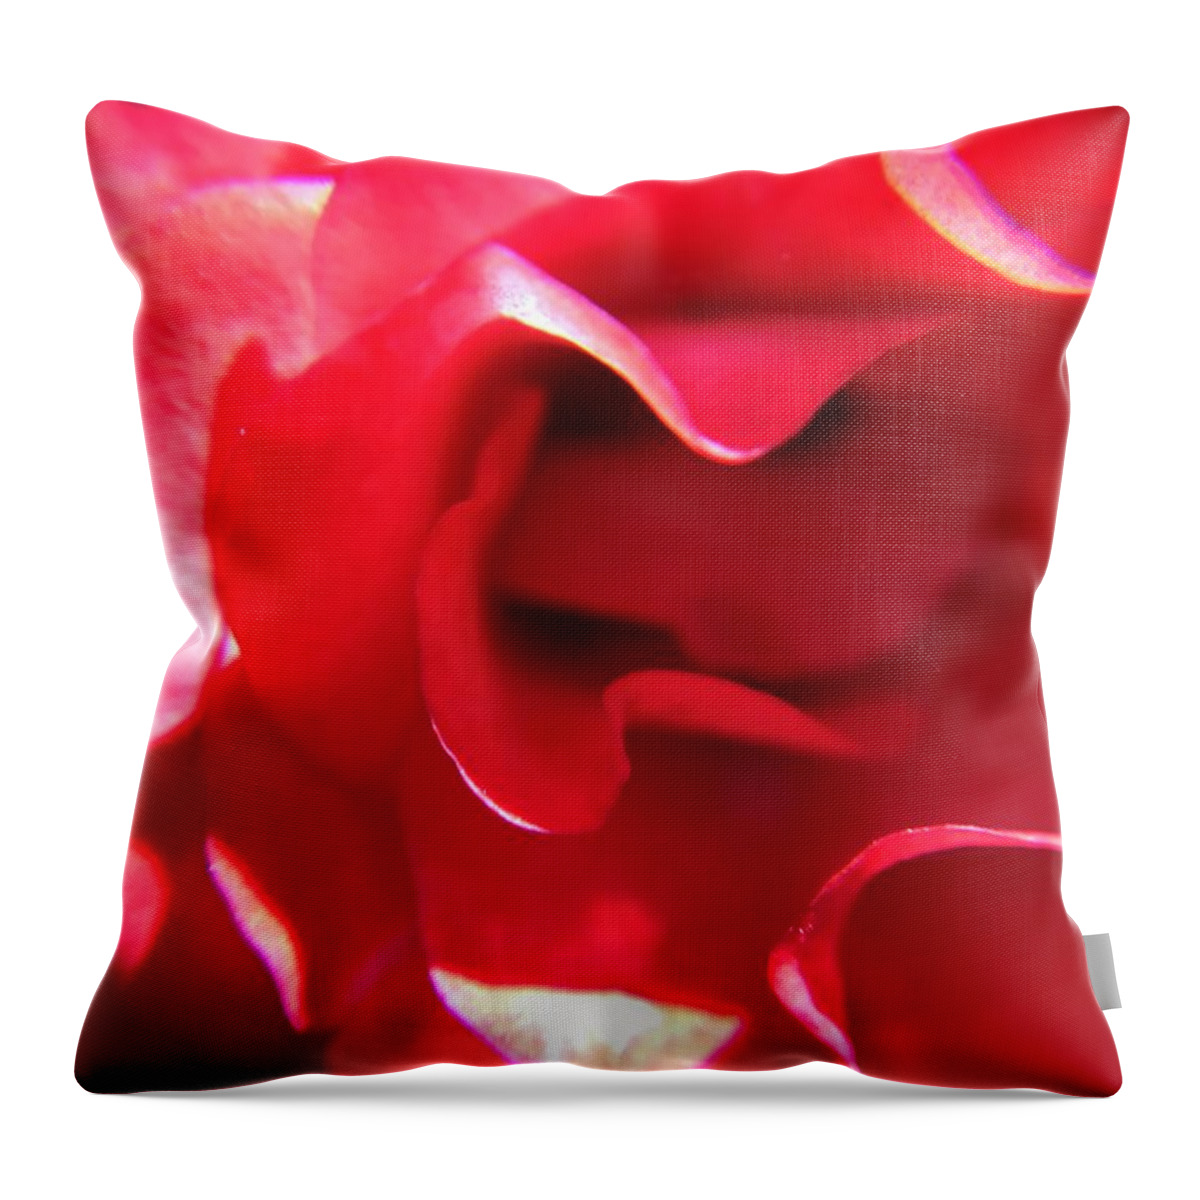 Red Rose Throw Pillow featuring the photograph Red Rose by Vivian Aumond